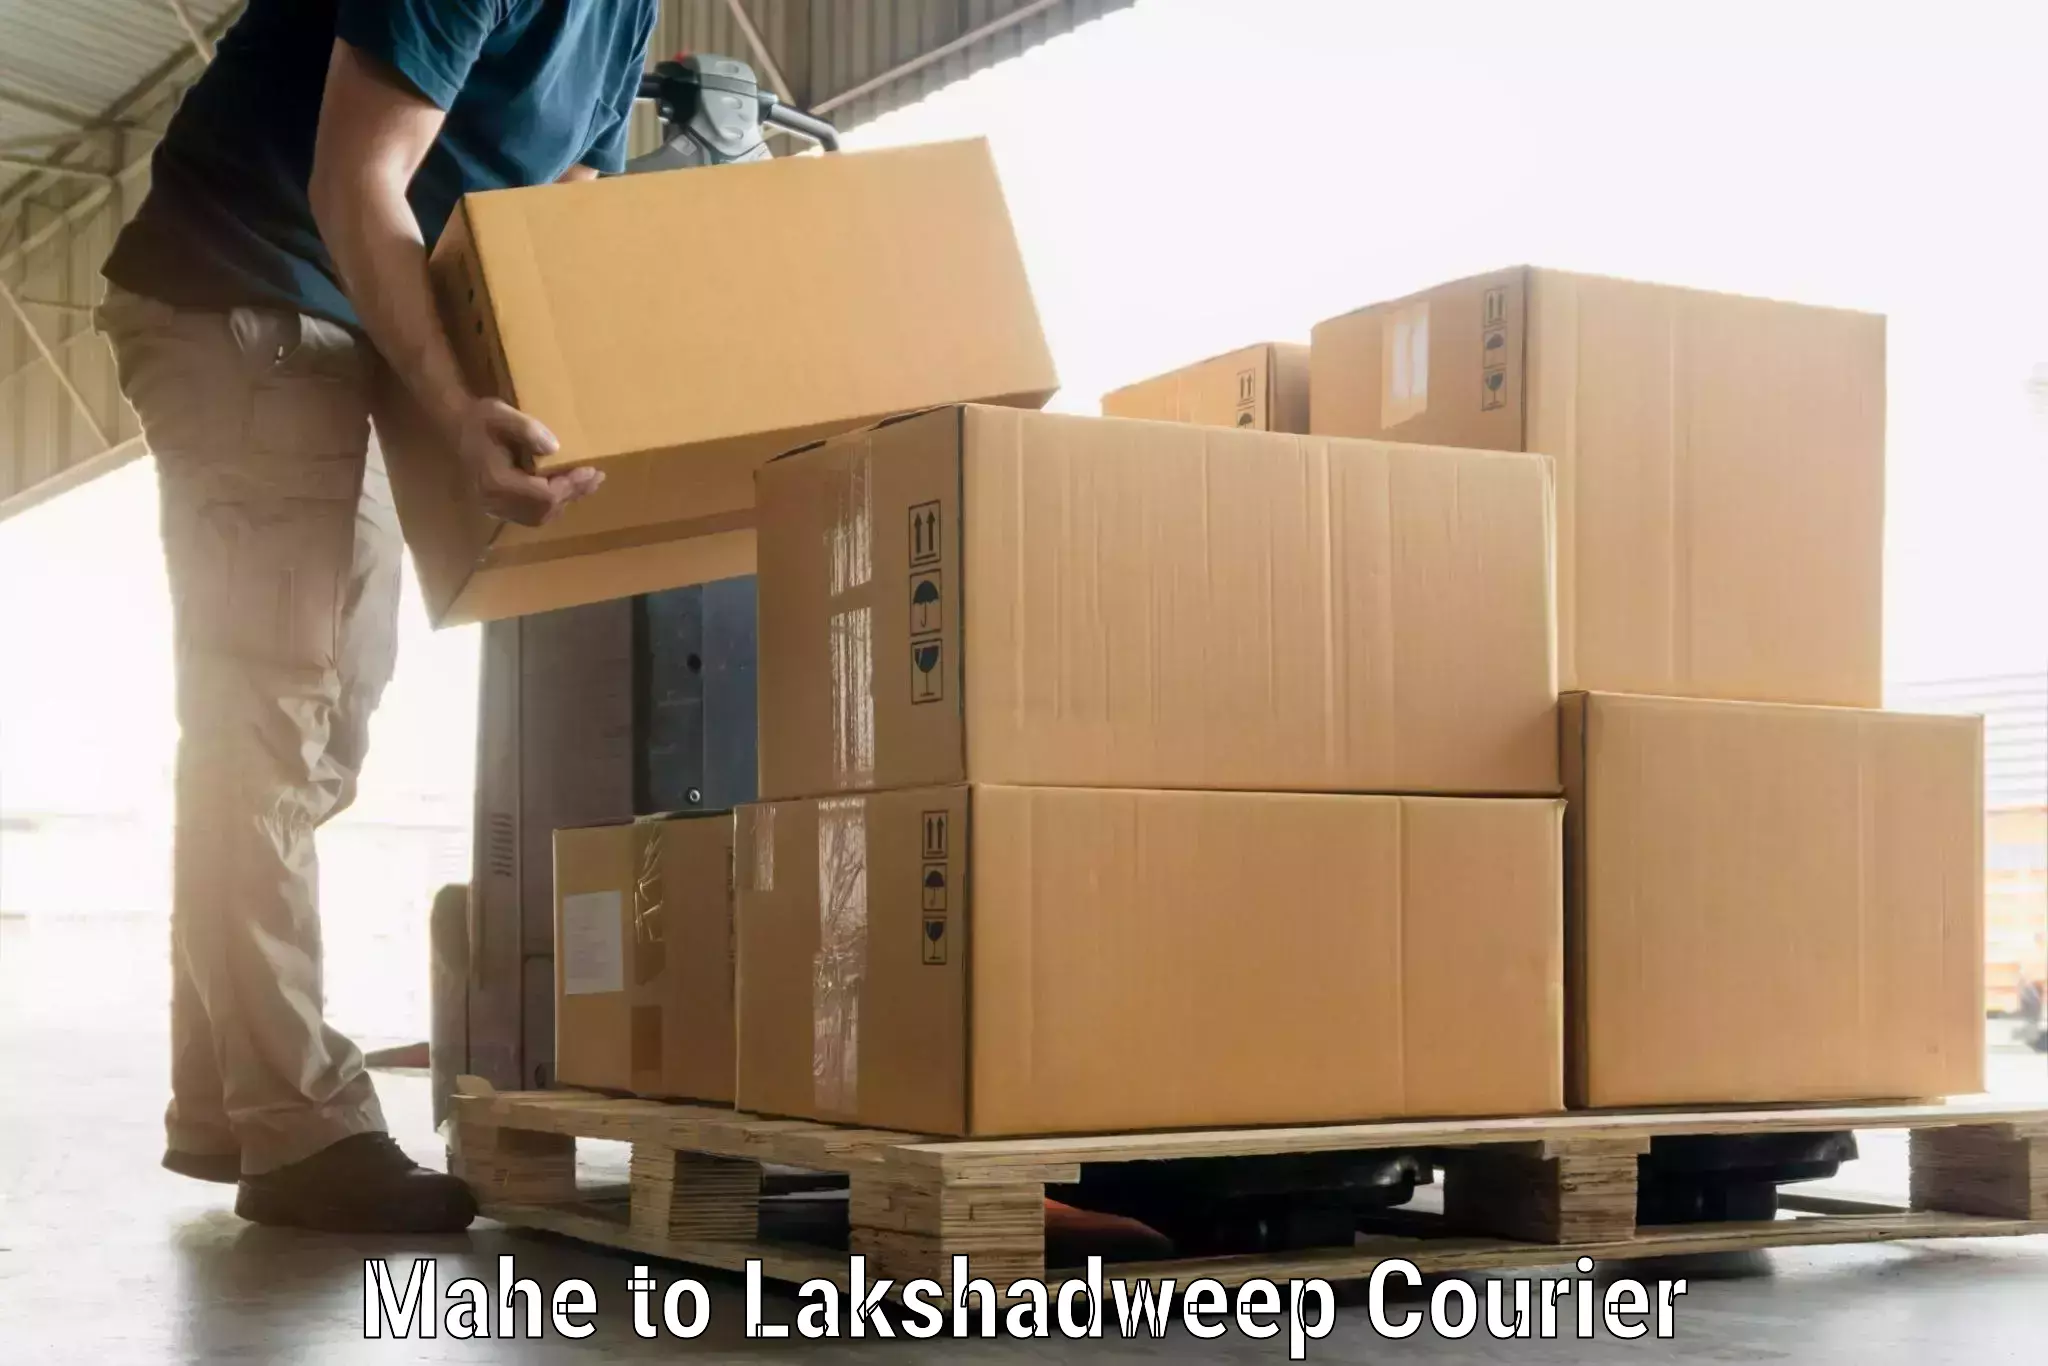 Luggage transport consultancy Mahe to Lakshadweep